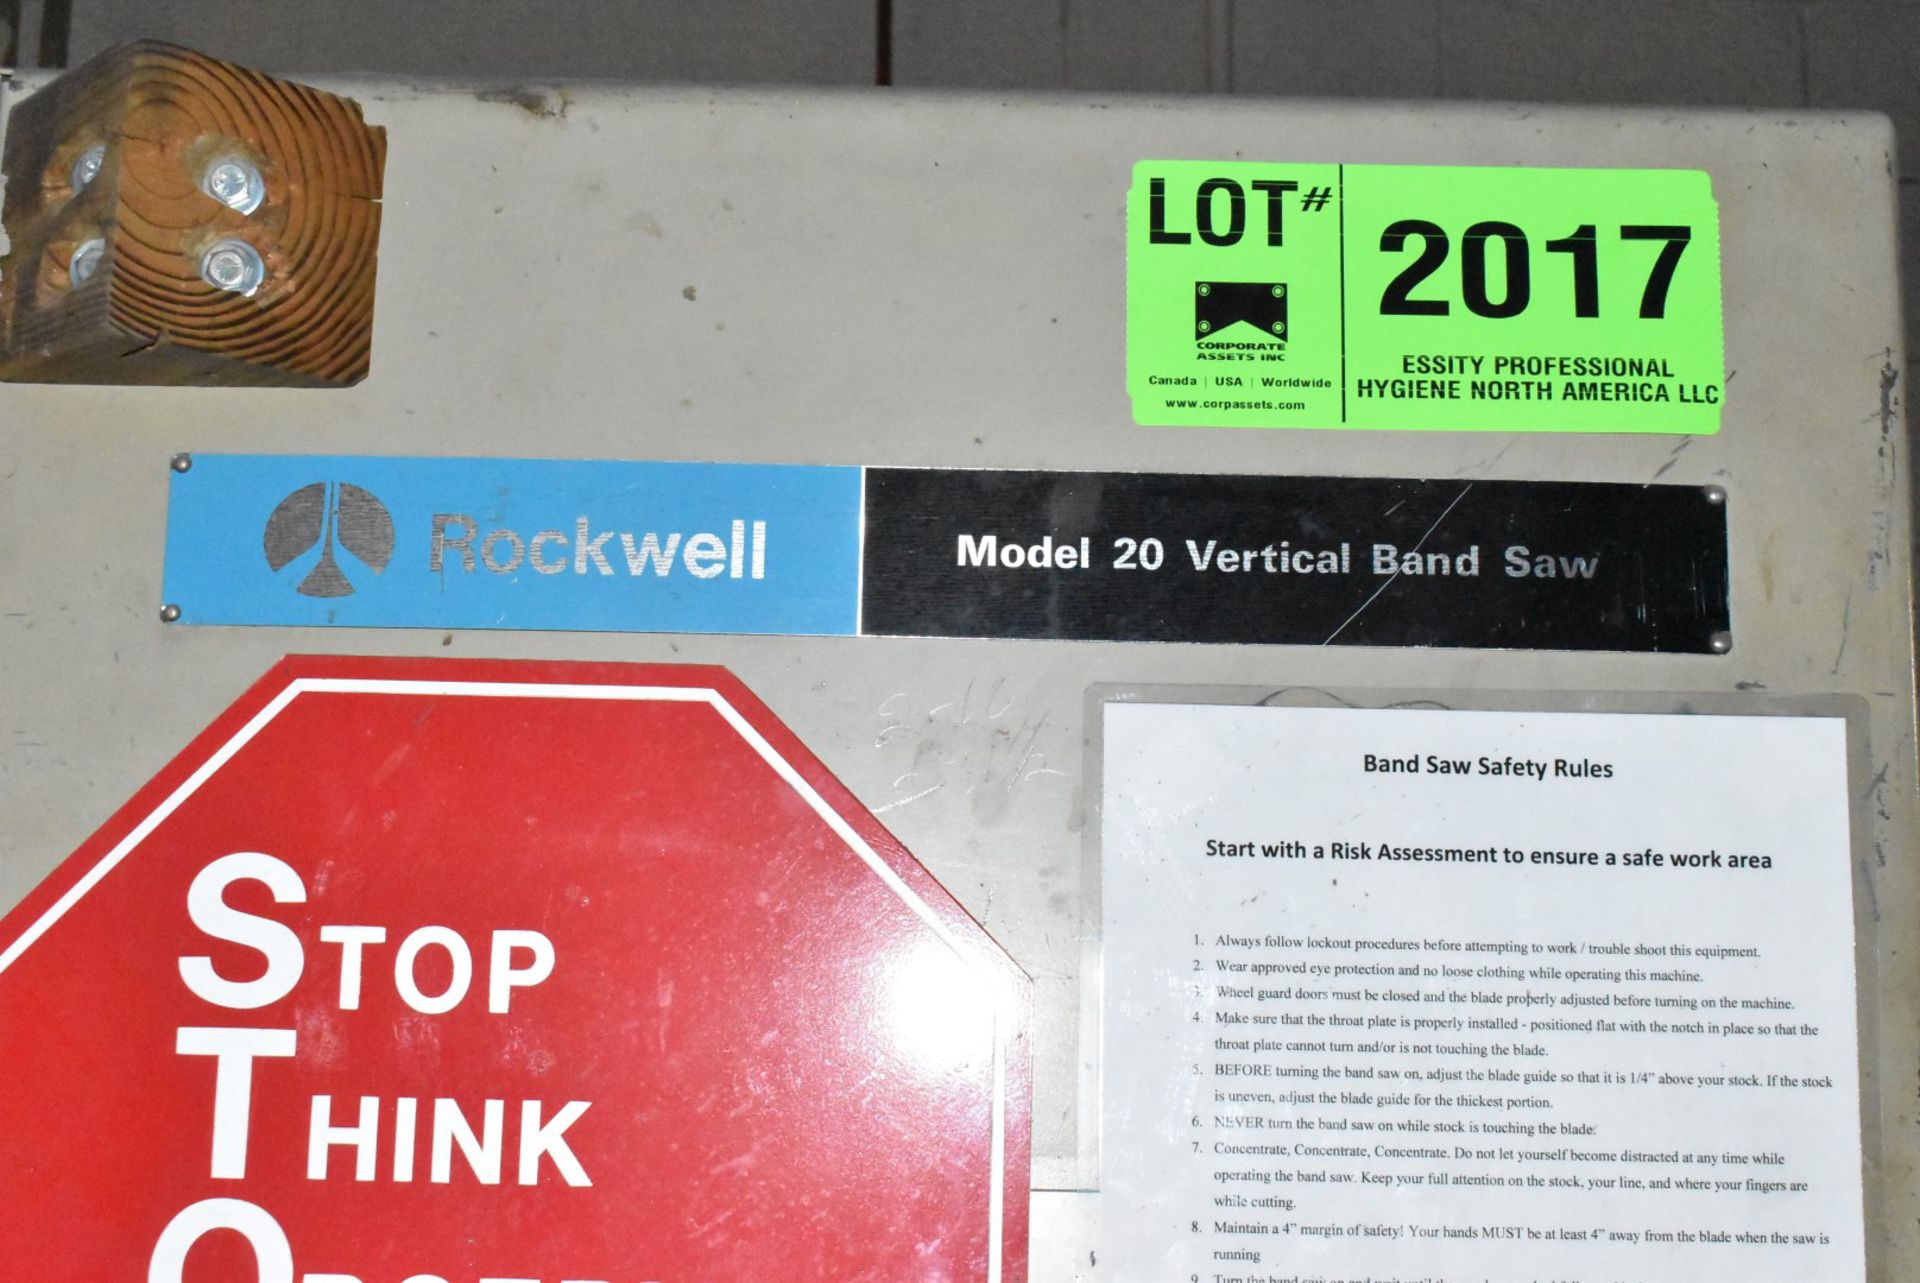 ROCKWELL MODEL 20 VERTICAL BAND SAW WITH 20" THROAT, 12" MAX WORKPIECE HEIGHT, 20"X24.5" MANUAL TILT - Image 3 of 6